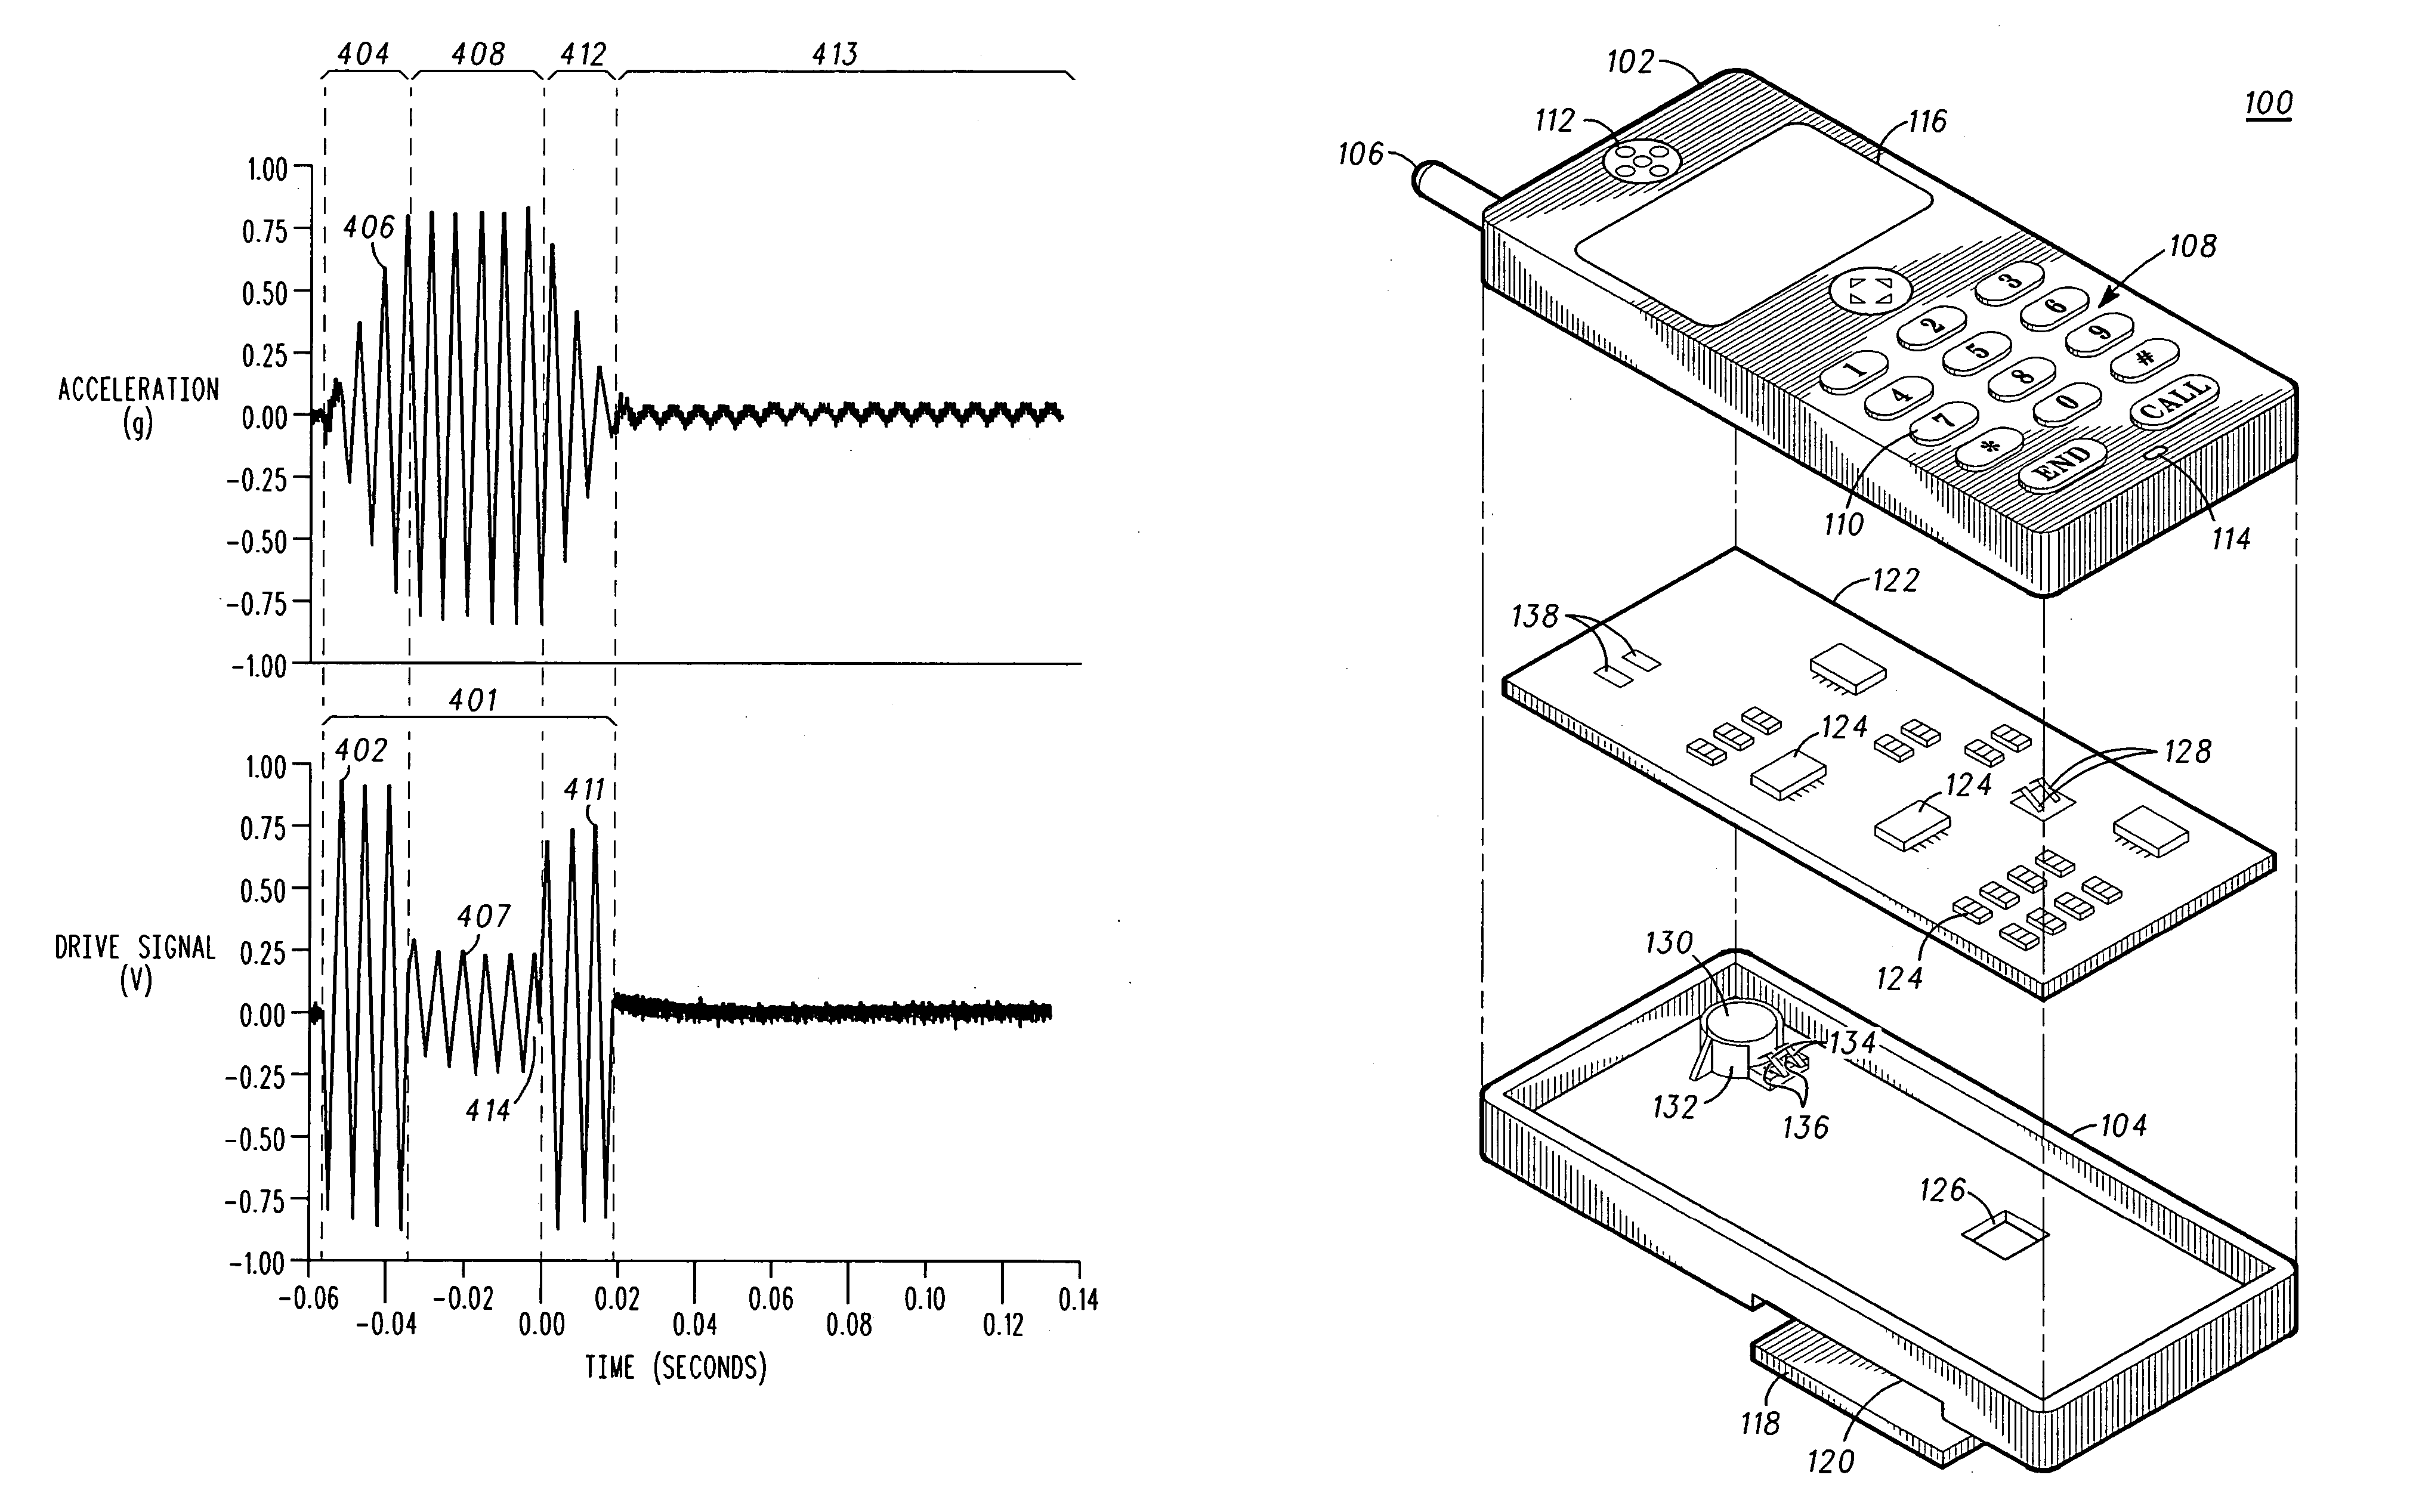 Method for abruptly stopping a linear vibration motor in portable communication device